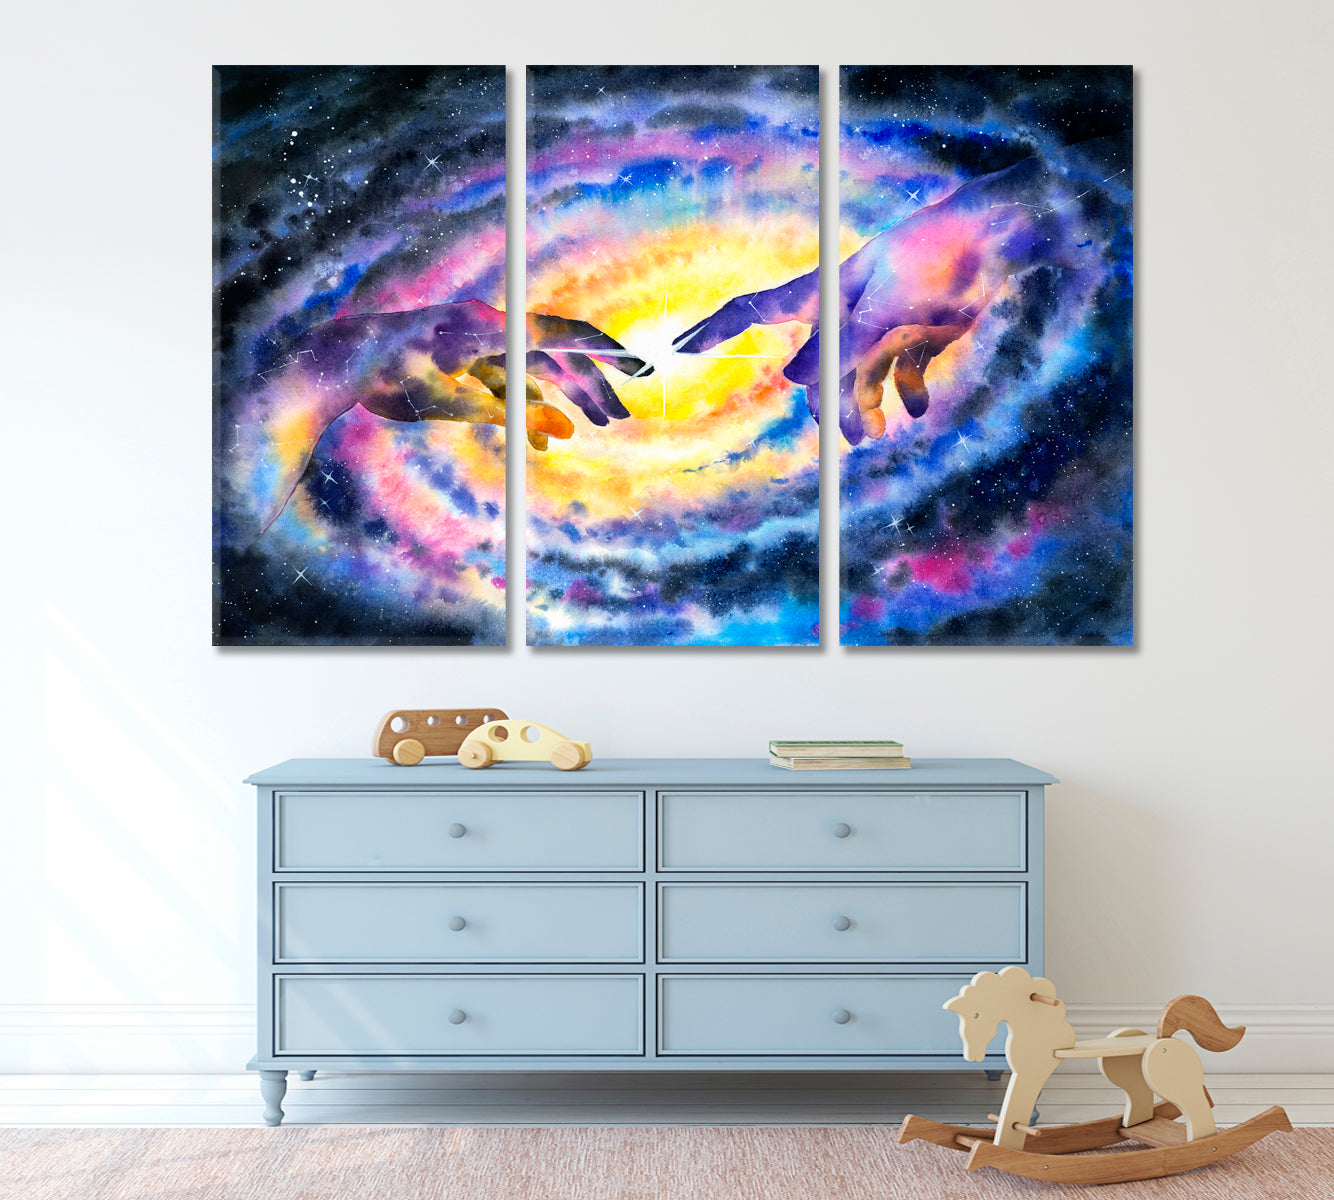 GALAXY Hand of God Creation And Universe Watercolor Artwork Celestial Home Canvas Décor Artesty 3 panels 36" x 24" 